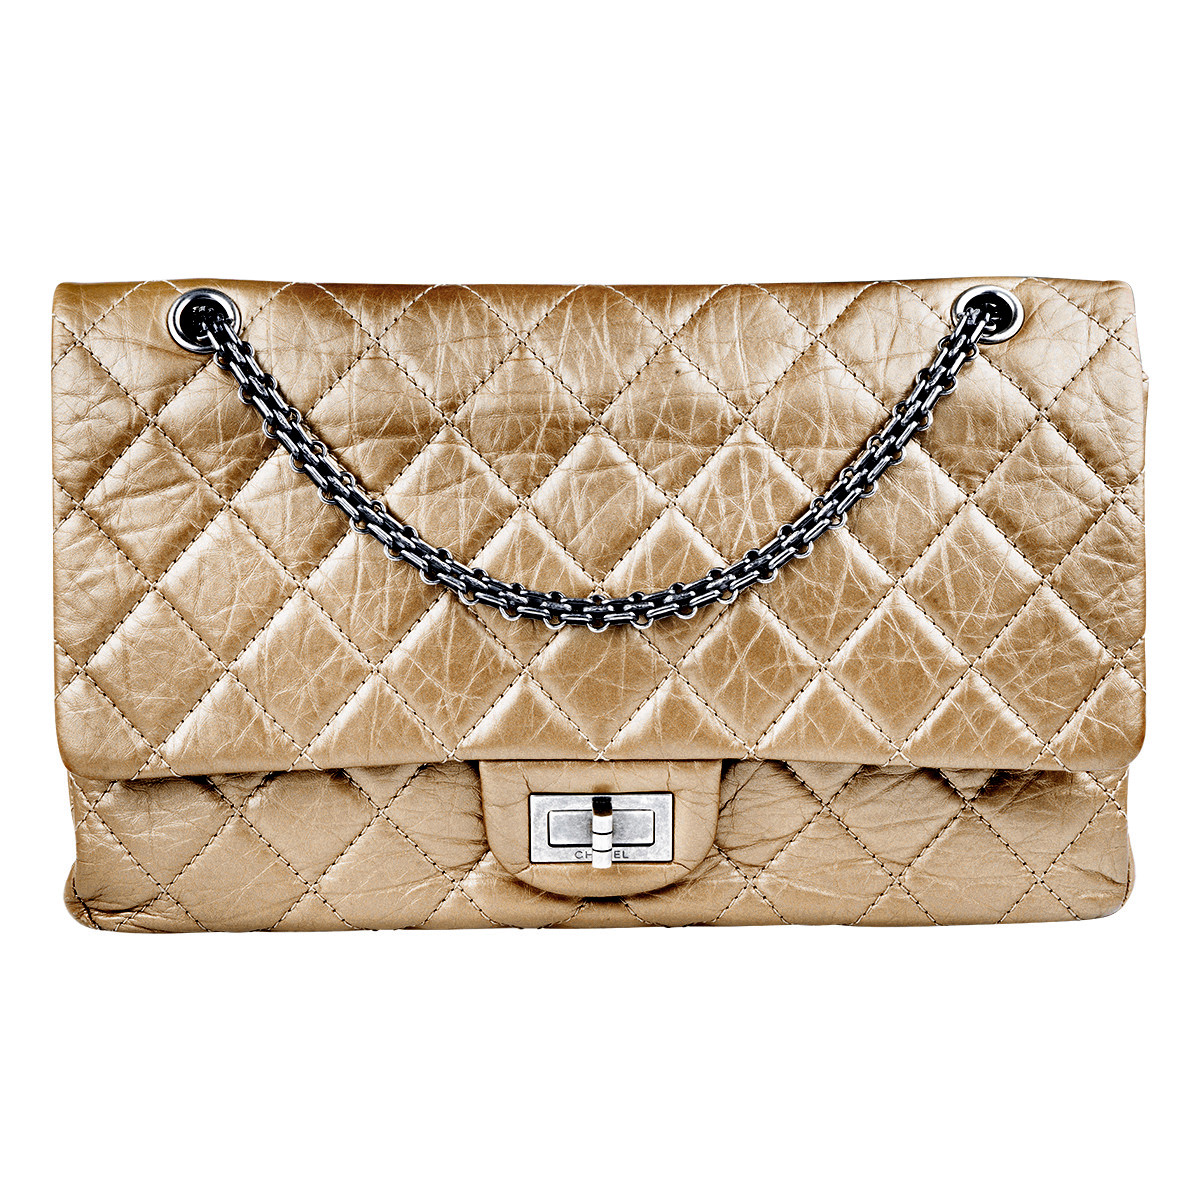 CHANEL, Bags, Chanel 9 Large Flap Bag